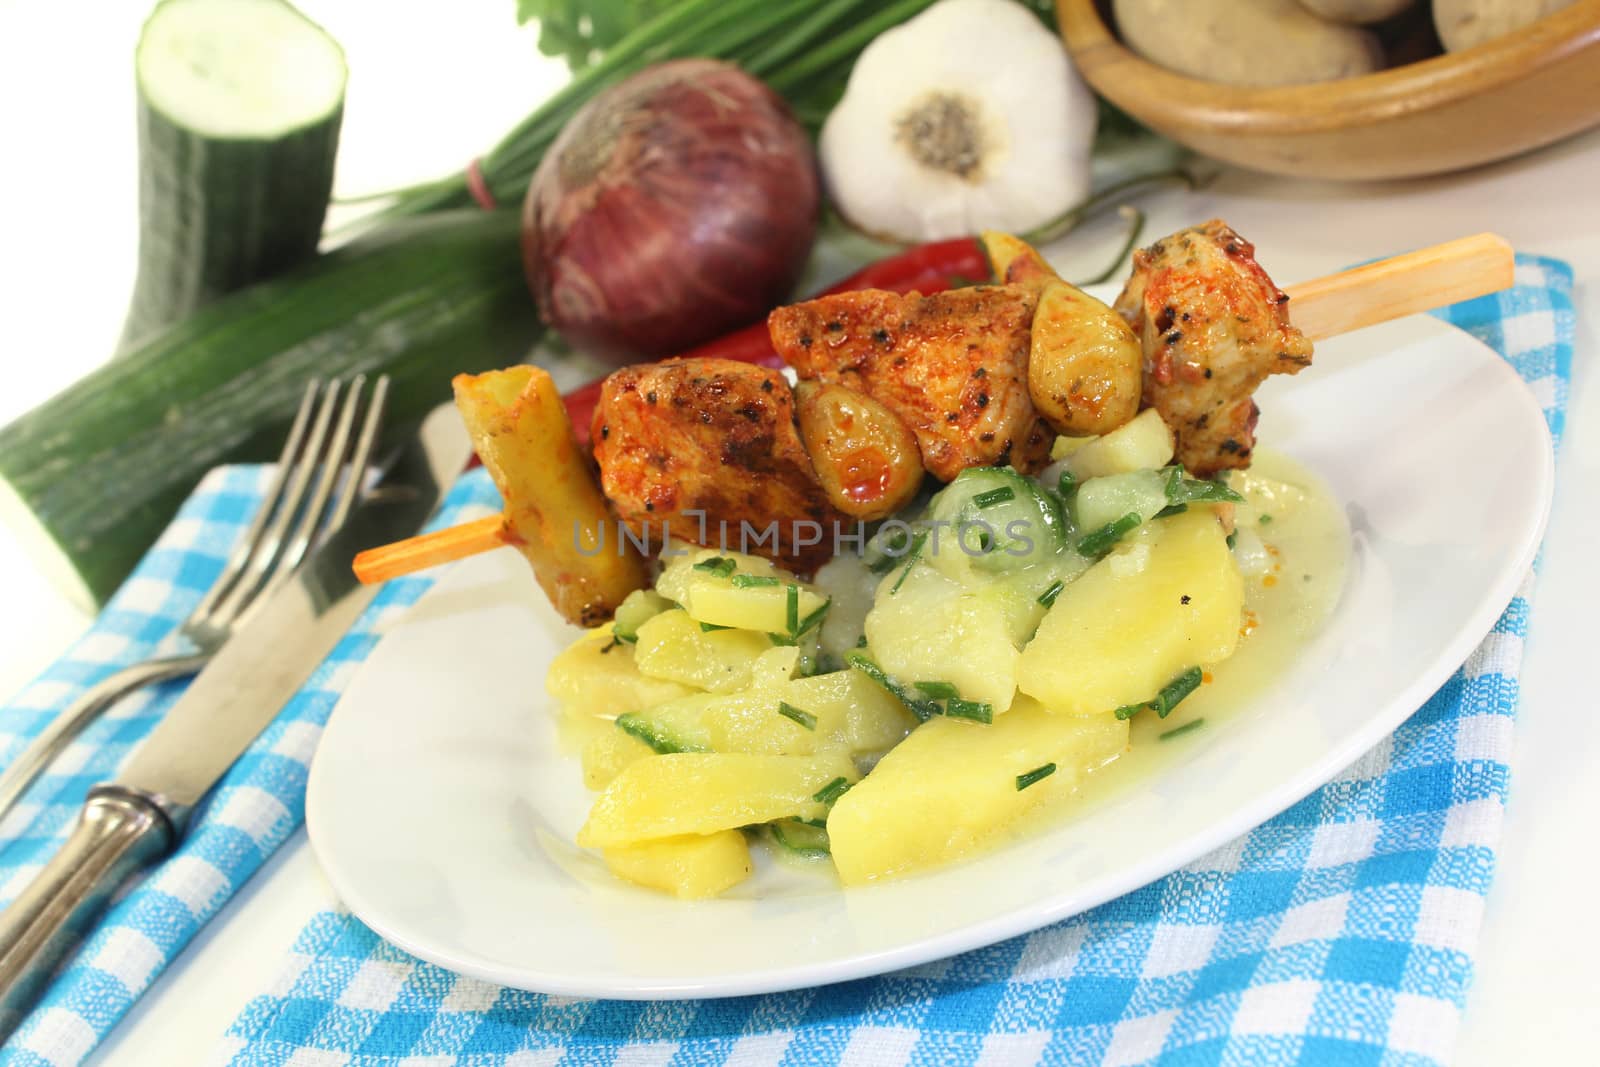 a Potato-cucumber salad with a fiery skewer